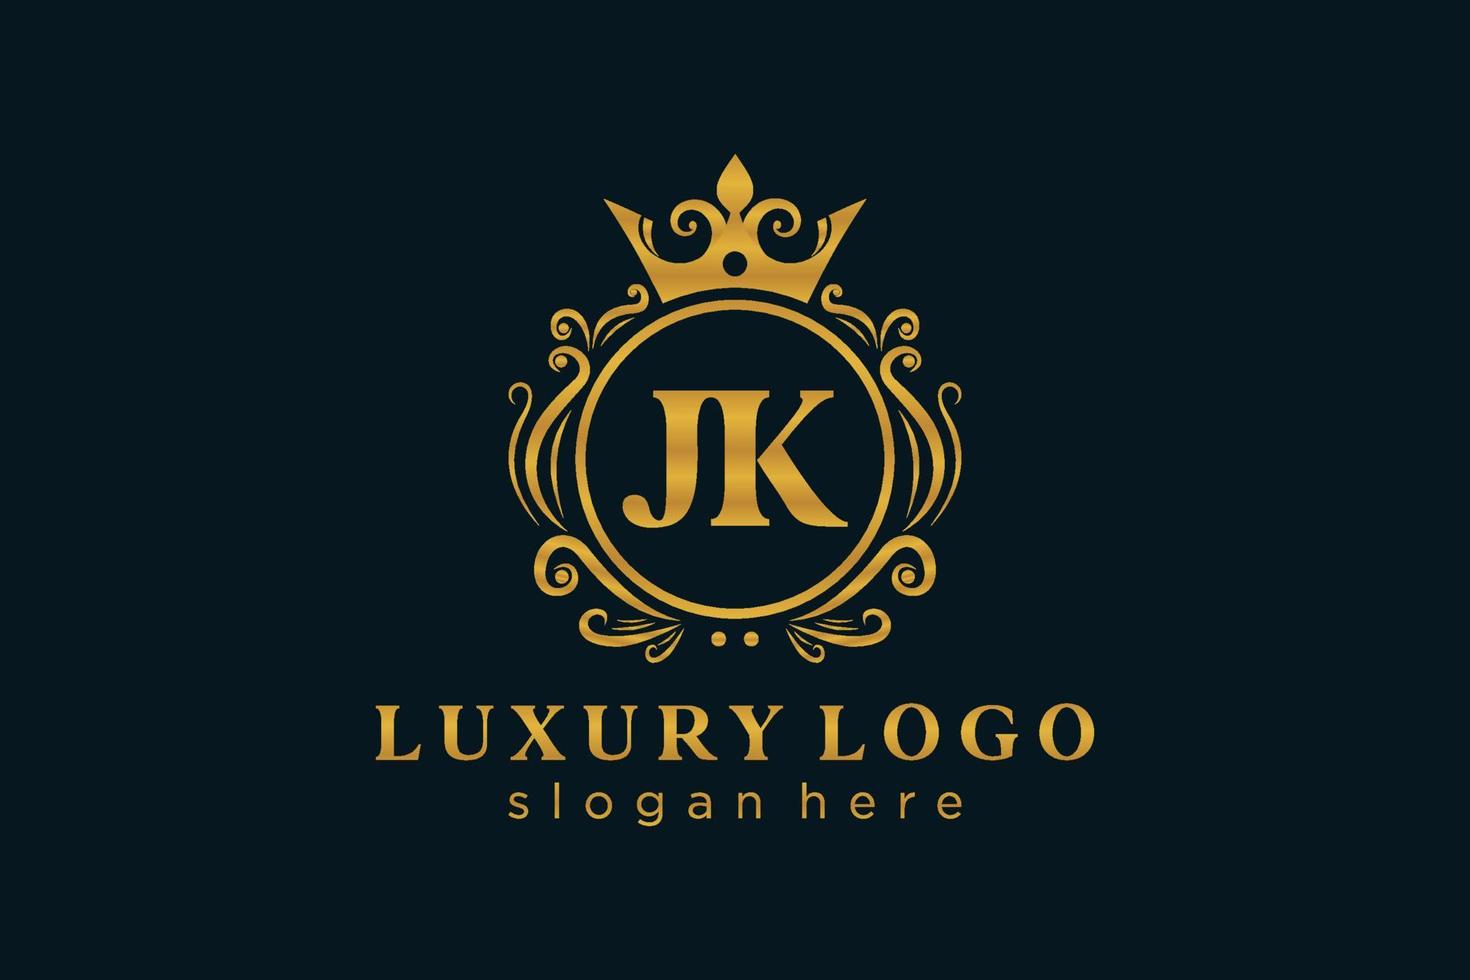 Initial JK Letter Royal Luxury Logo template in vector art for Restaurant, Royalty, Boutique, Cafe, Hotel, Heraldic, Jewelry, Fashion and other vector illustration.